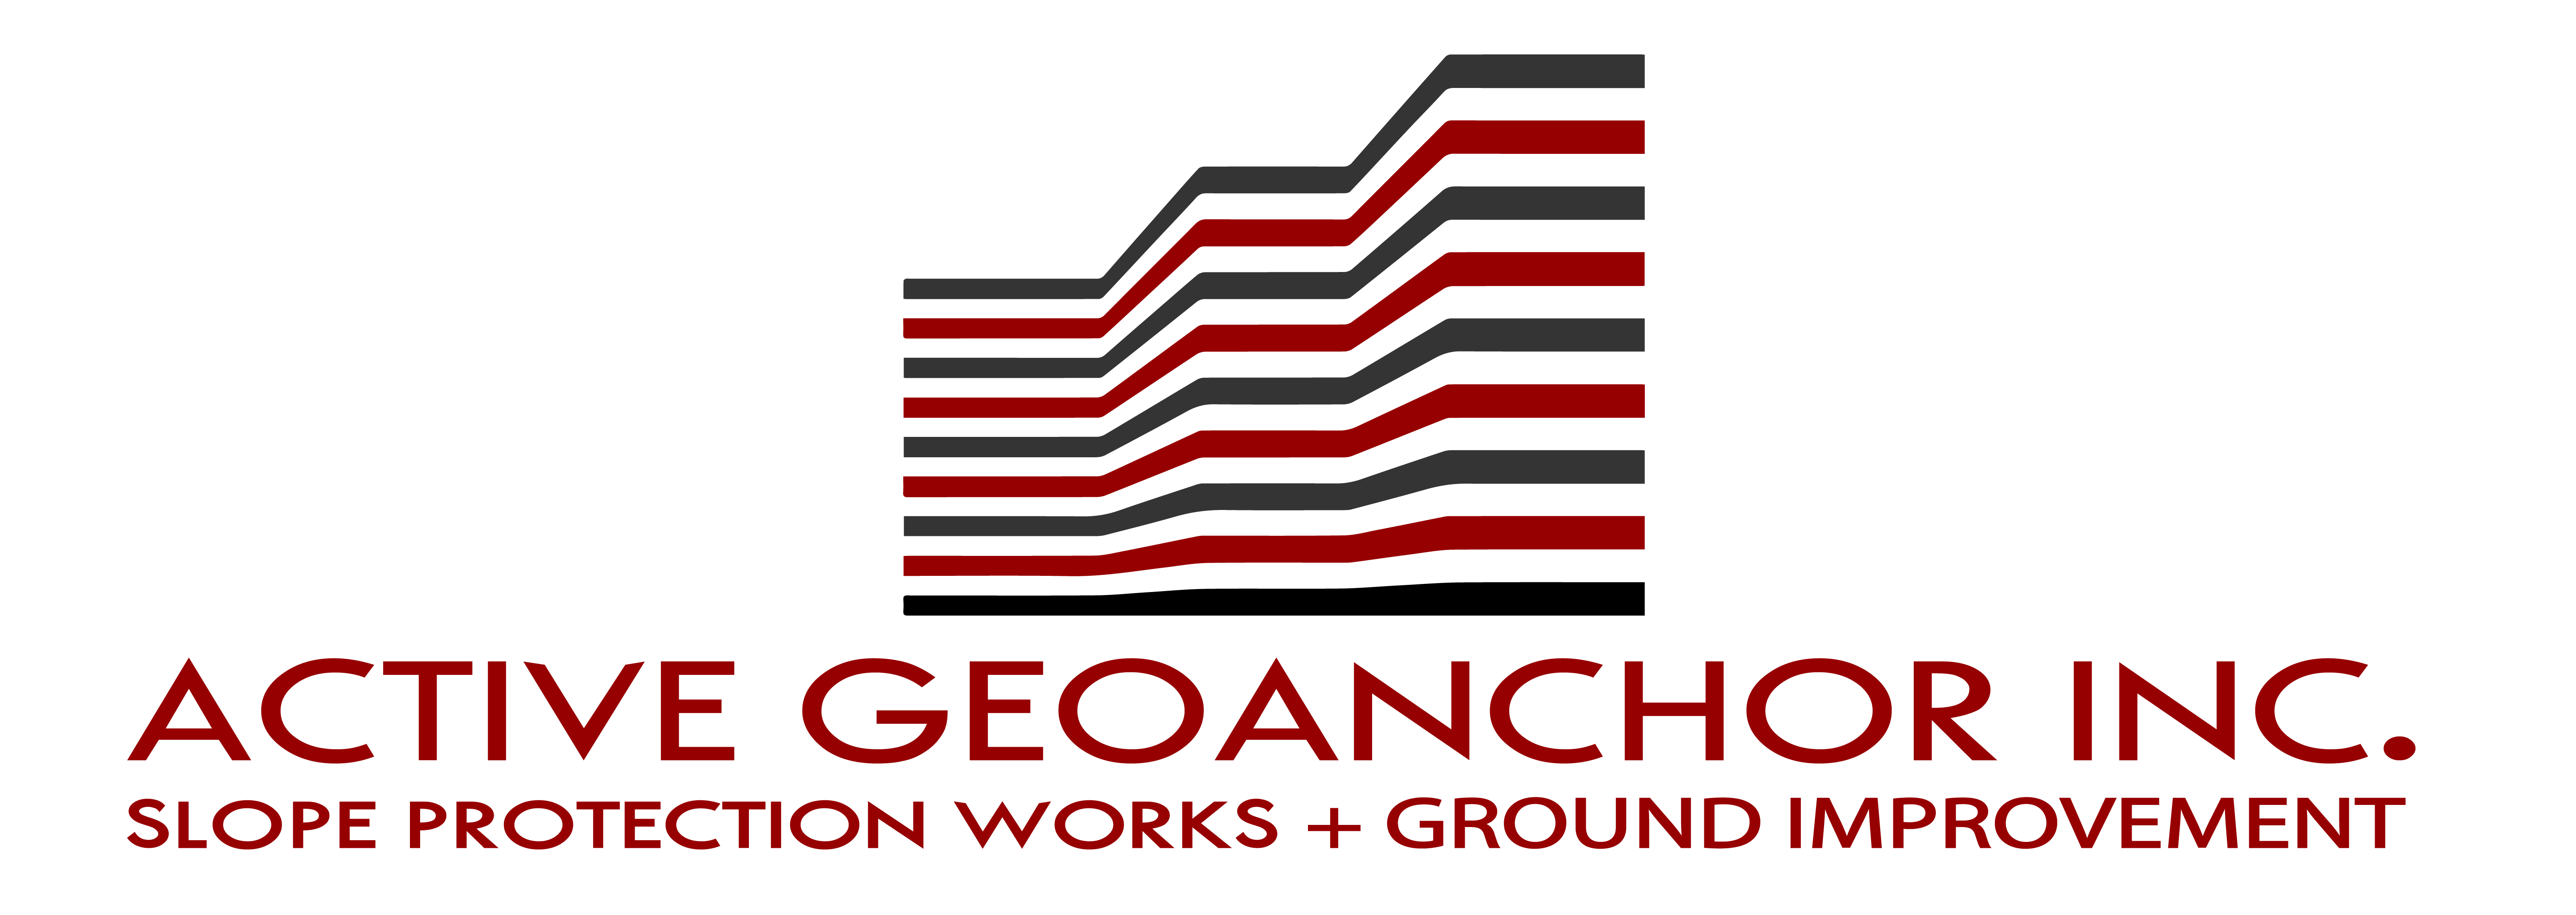 ACTIVE GEOANCHOR INC